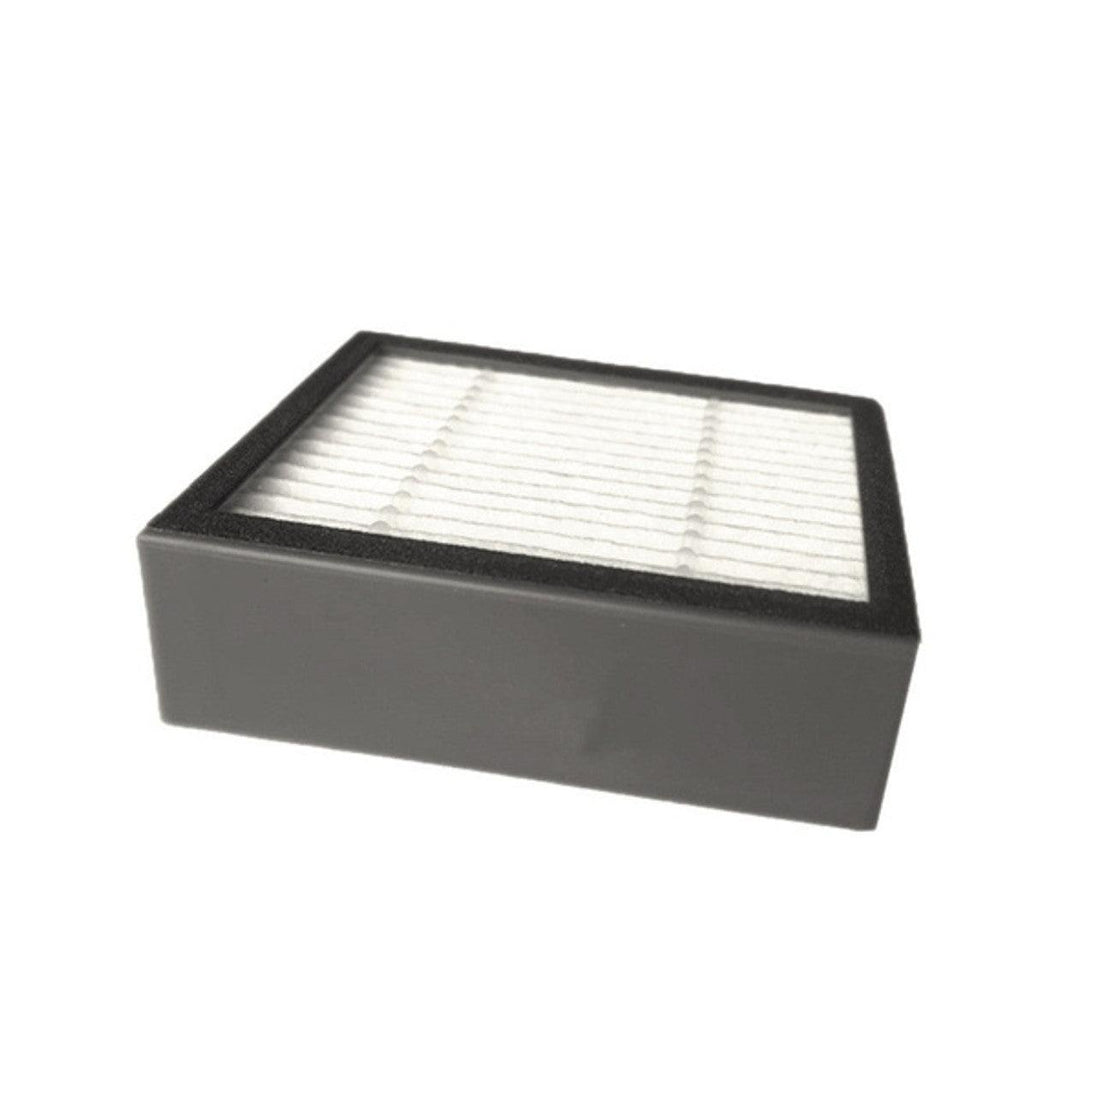 Buy 1 X HEPA filter for iRobot Roomba I, E and J series robots discounted | Products On Sale Australia